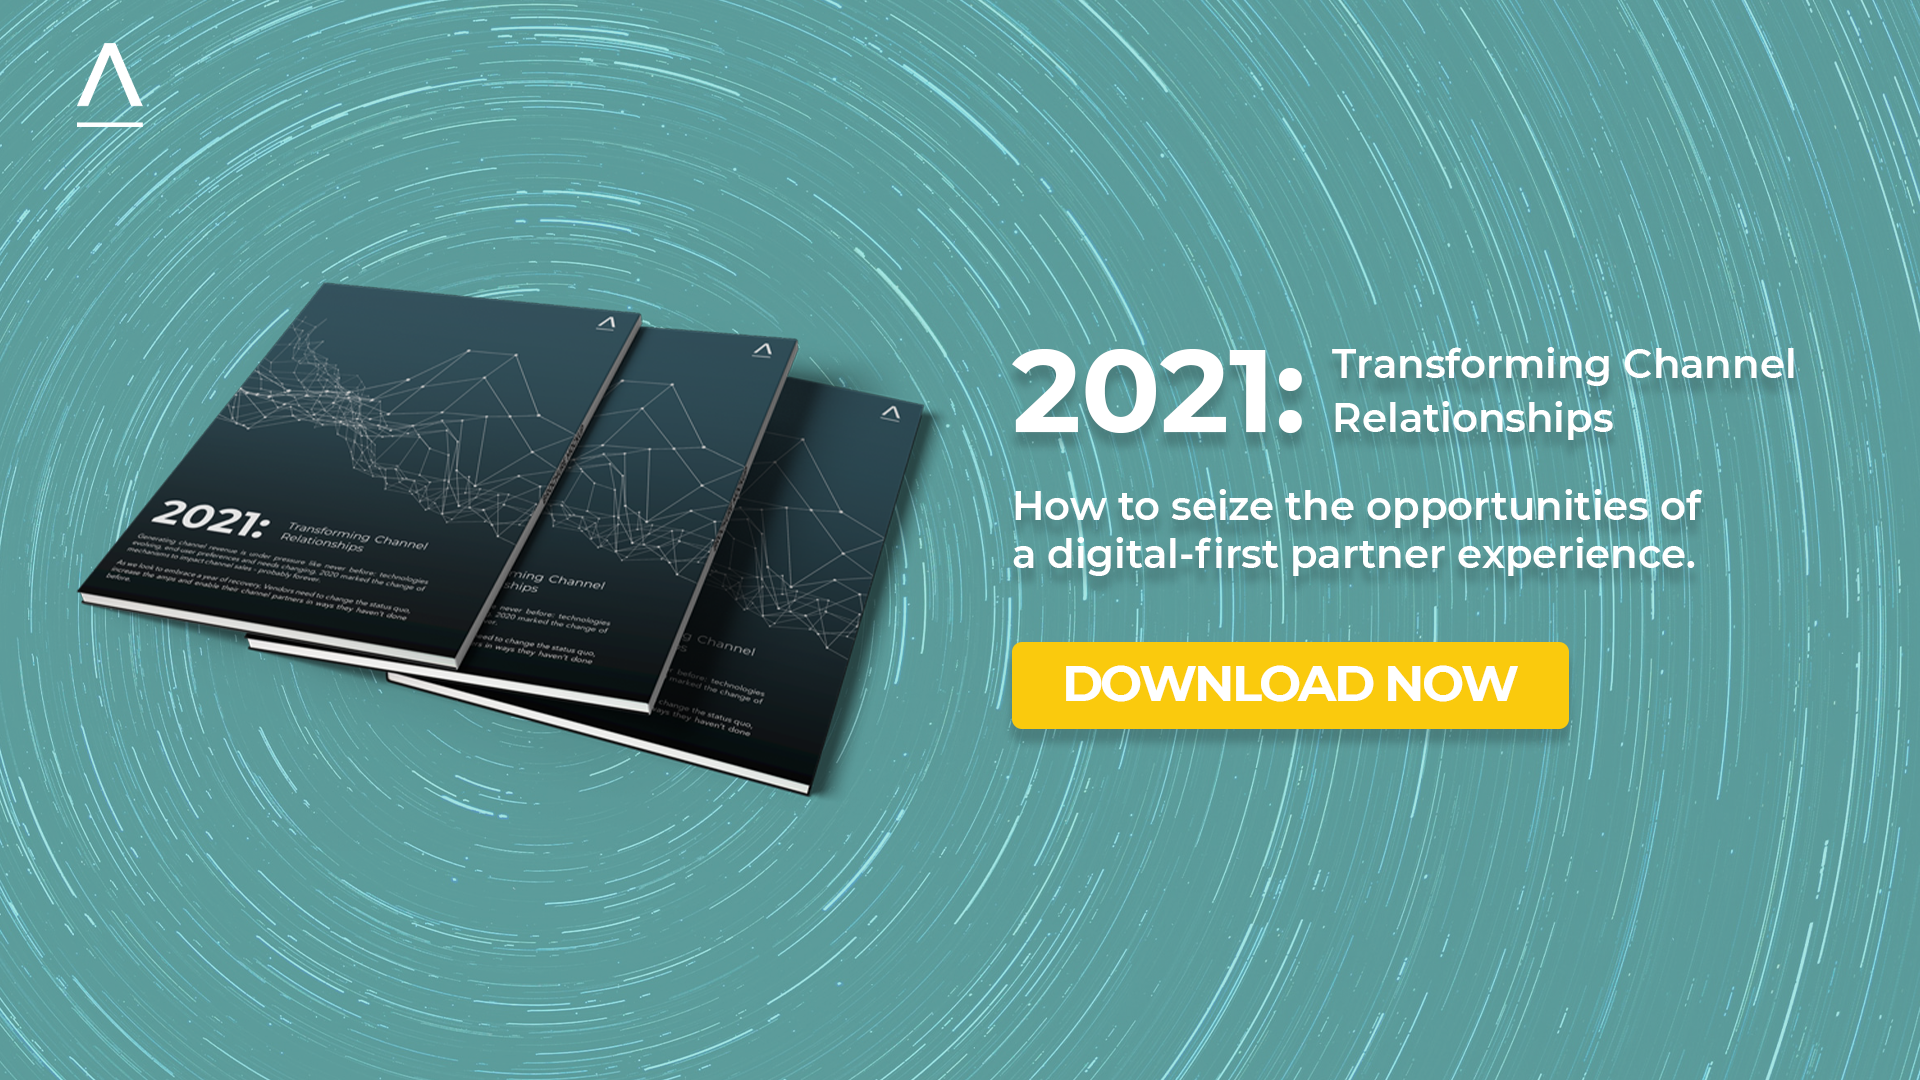 Transforming channel relationships insights report ad download